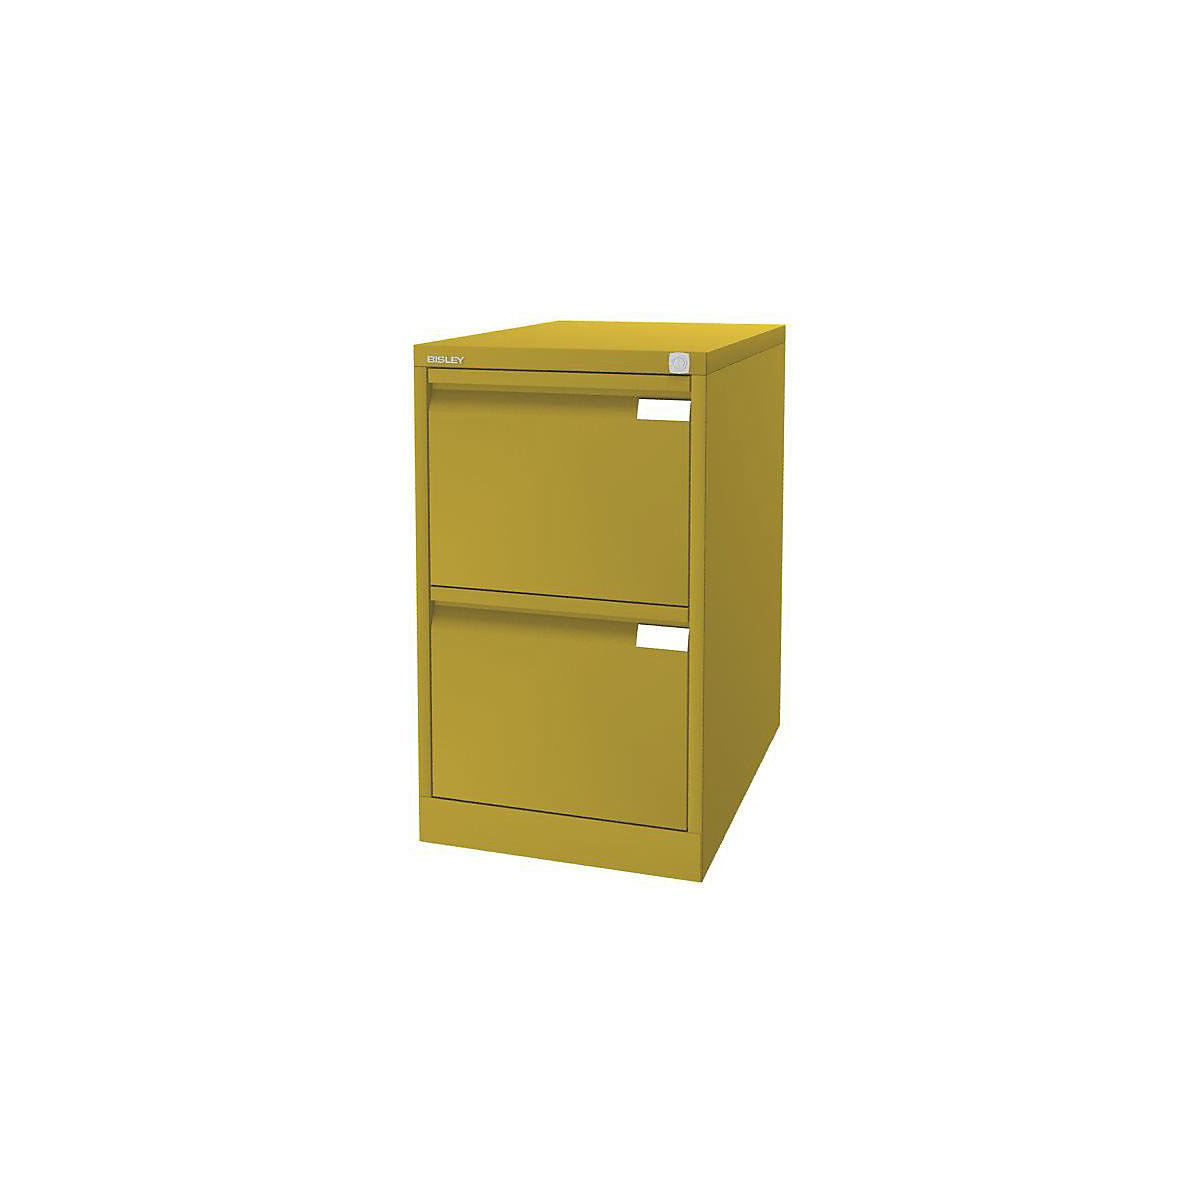 Suspension file cabinet, 1-track – BISLEY, 2 A4 drawers, yellow-10